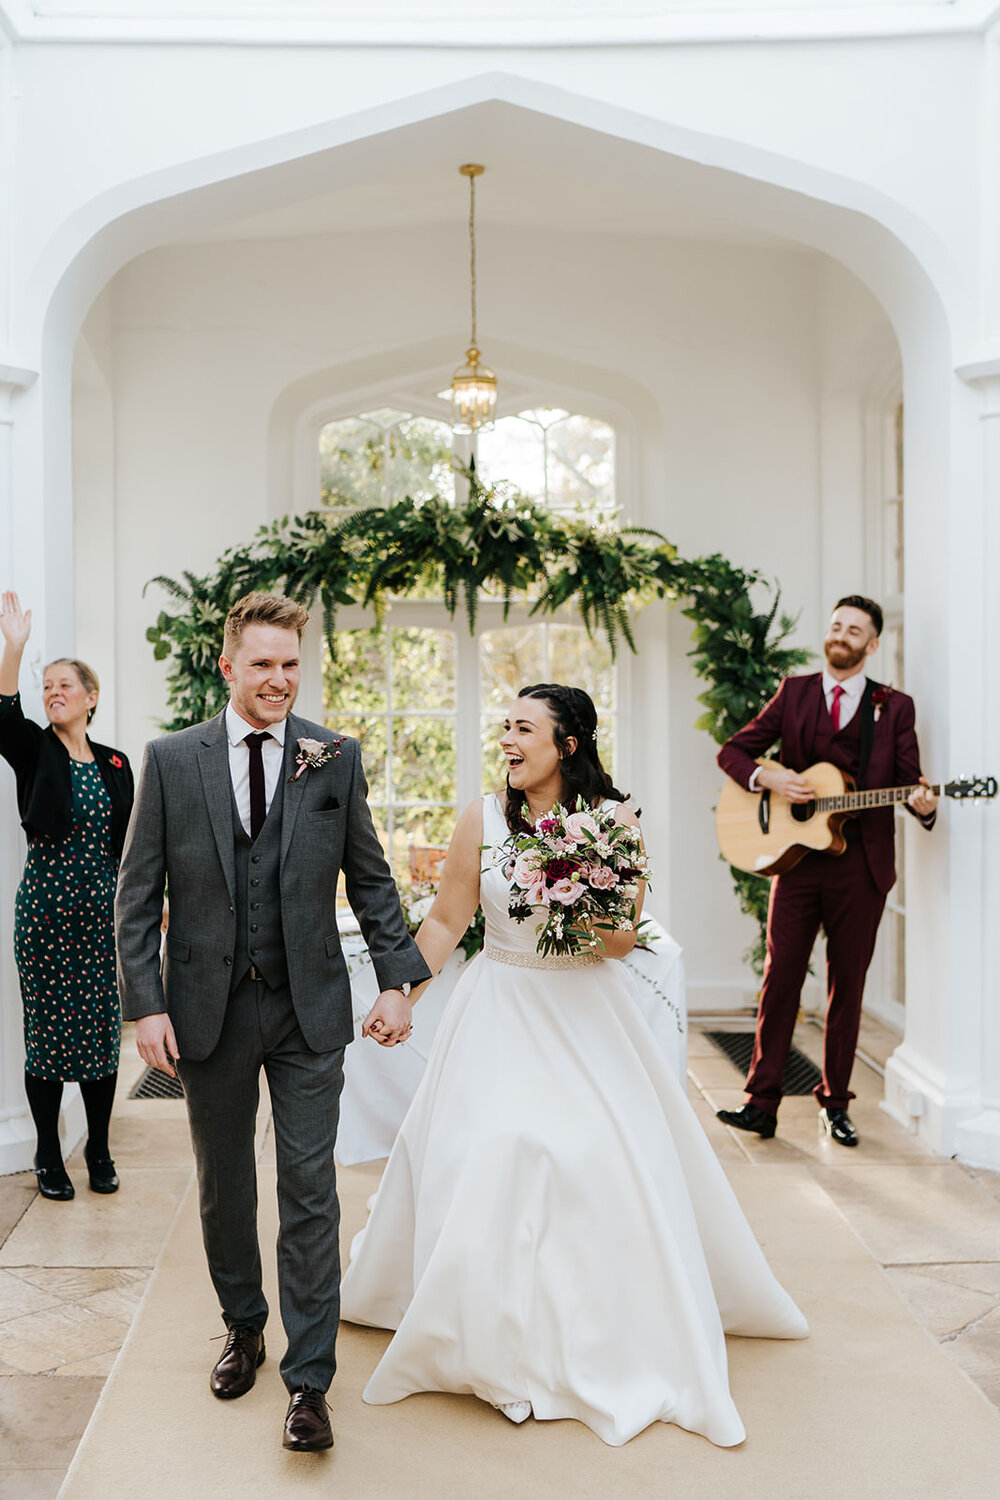 Bride and groom walk back down the aisle as married couple while friend, in the background, plays their favourite song on guitar